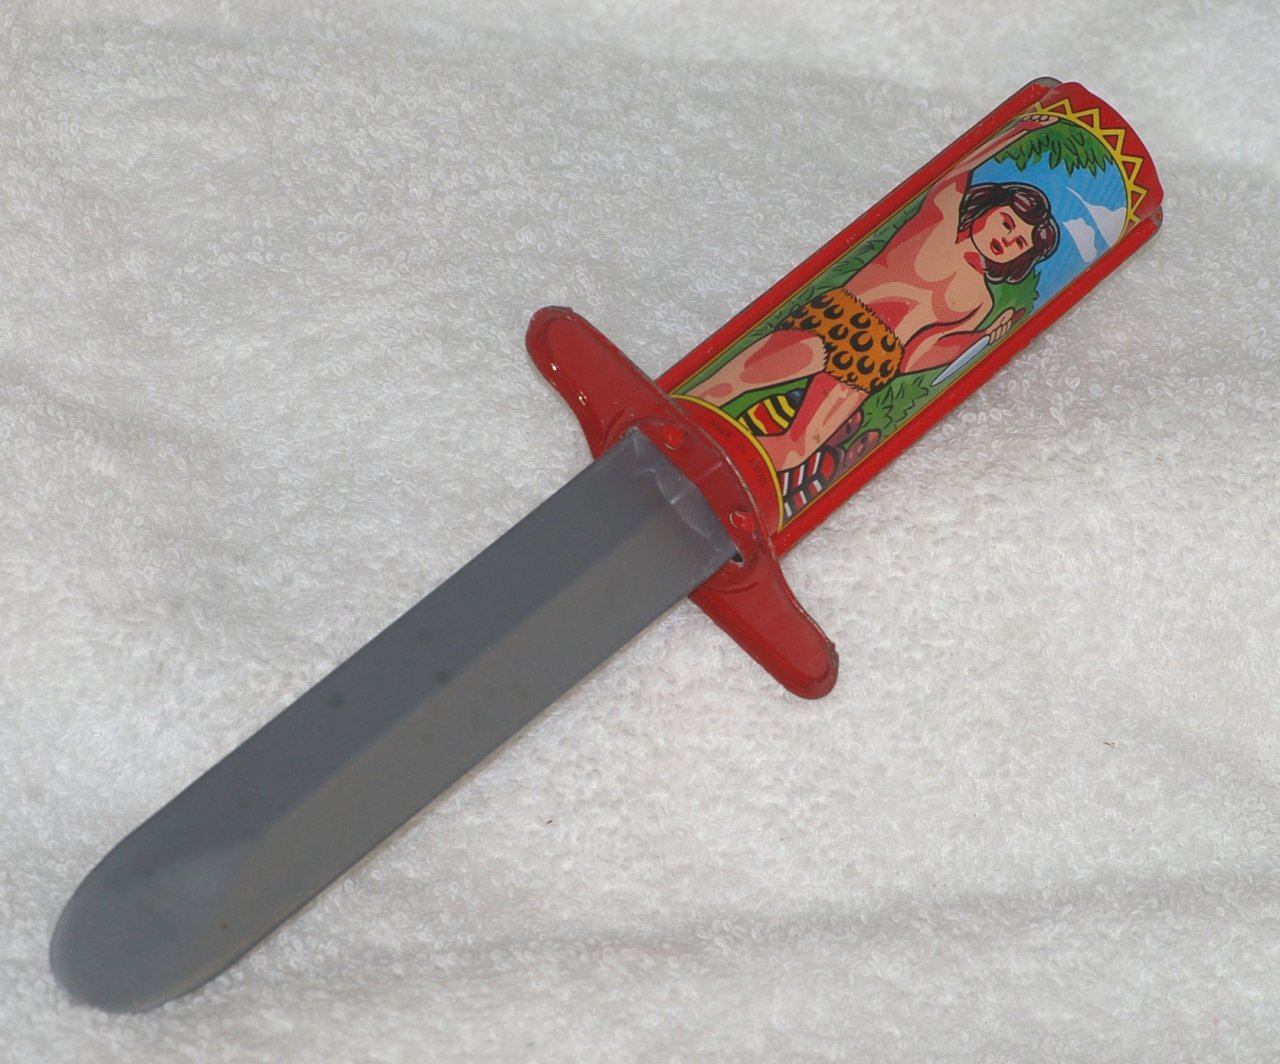 Spring Trick Knife with Tarzan Theme Tin Litho Handle about 1960